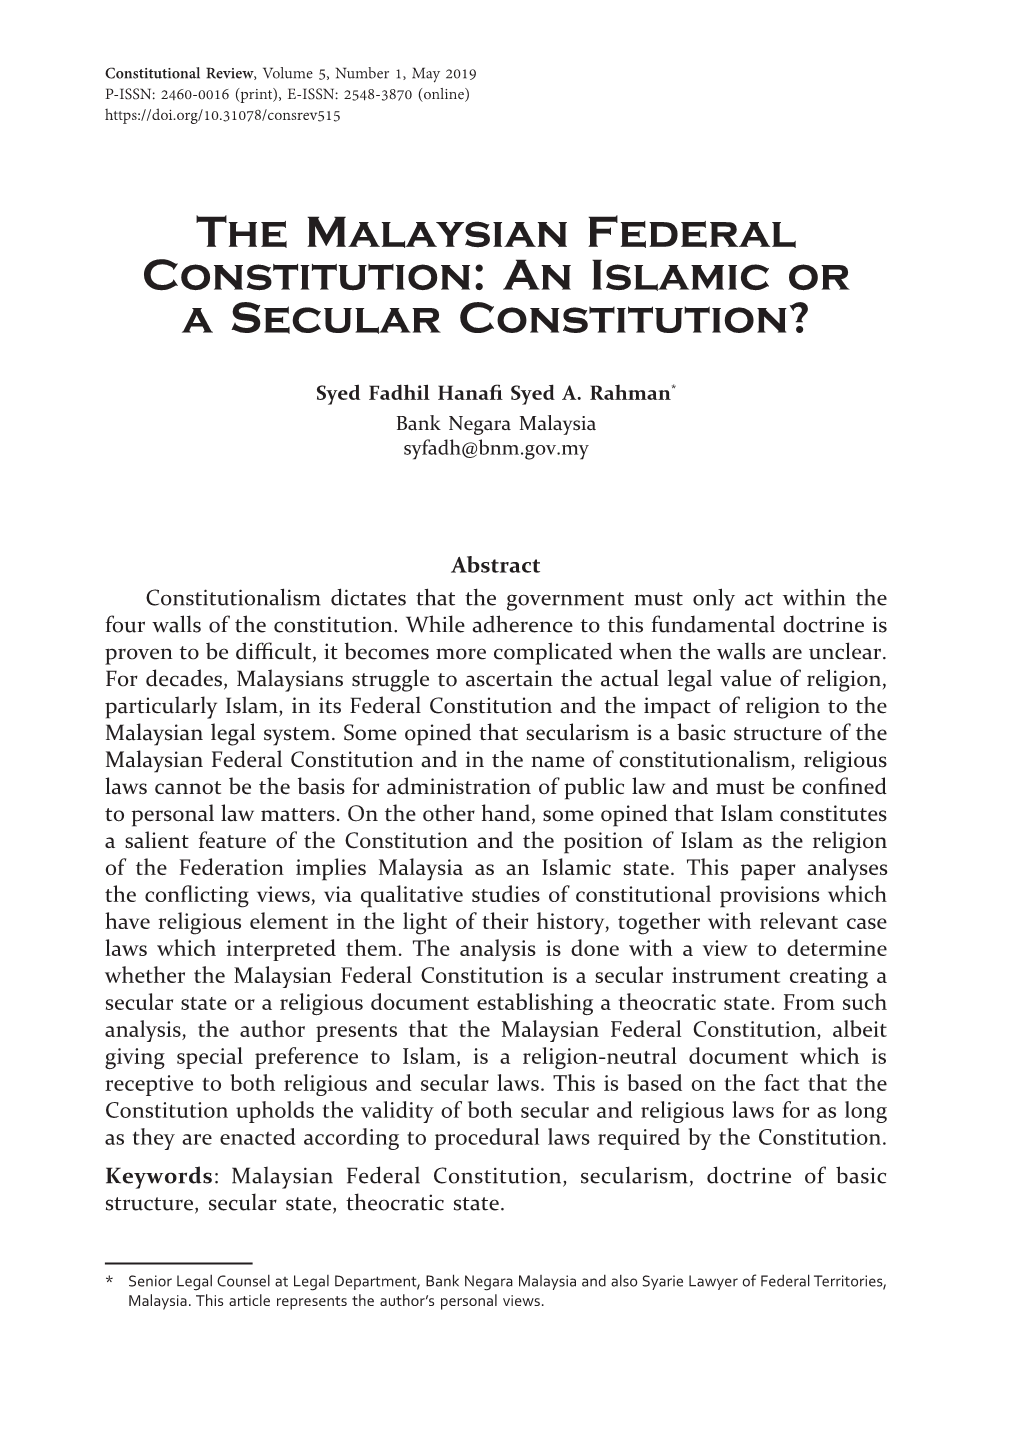 The Malaysian Federal Constitution: an Islamic Or a Secular Constitution?